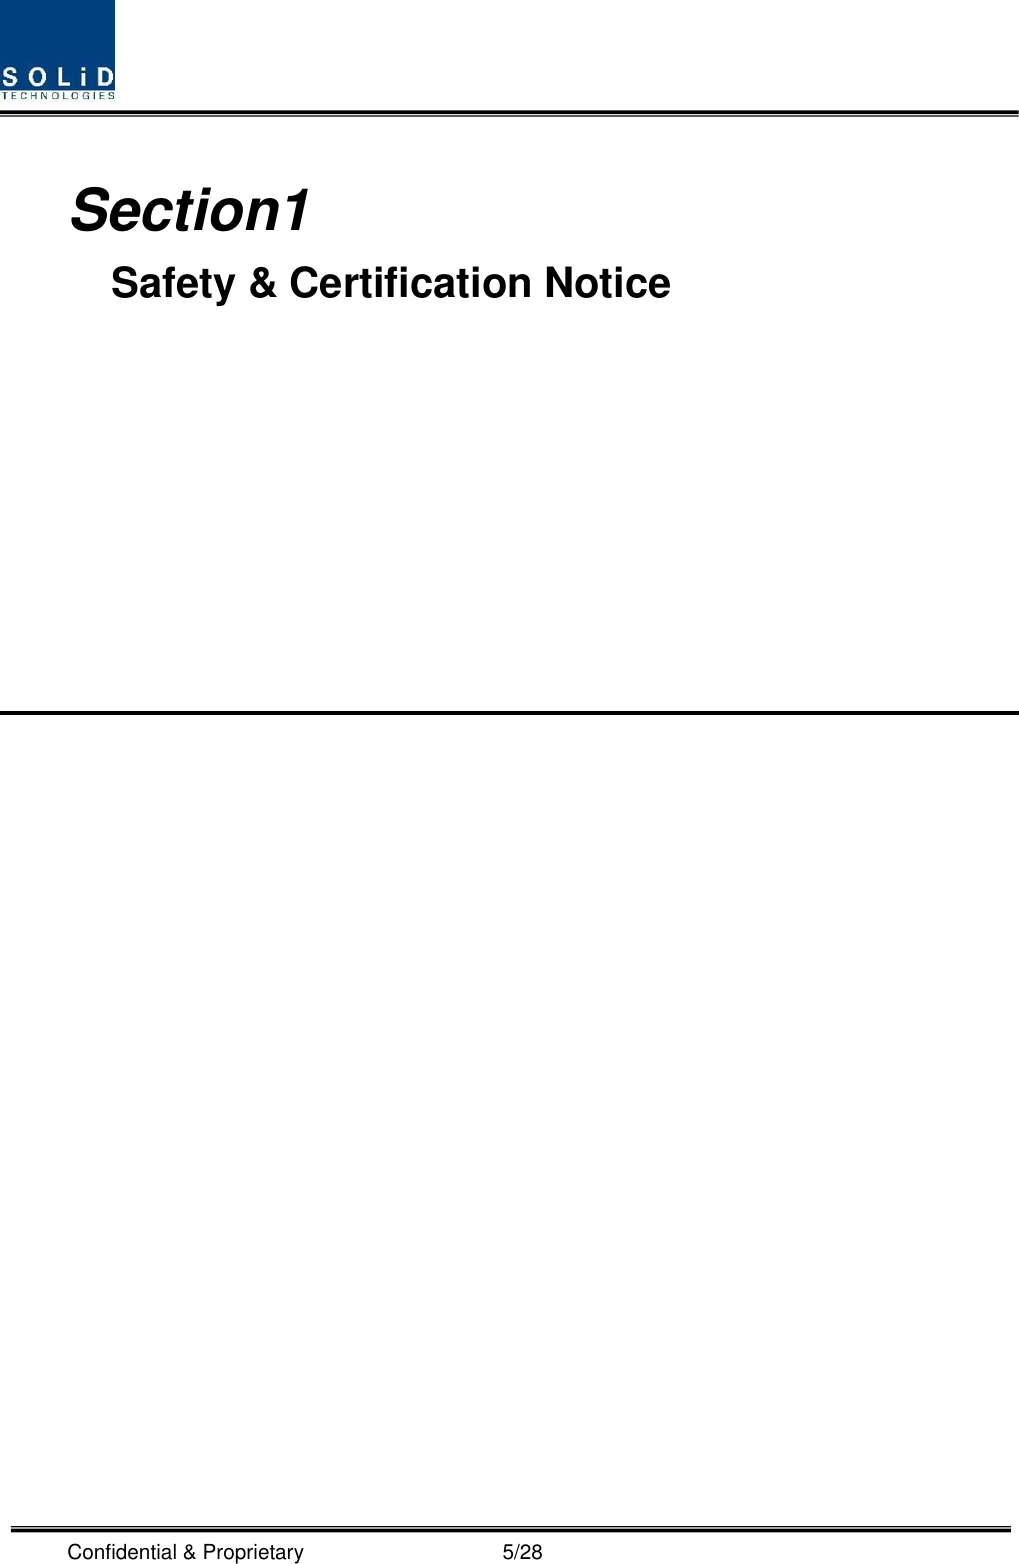  Confidential &amp; Proprietary                                      5/28  Section1                                             Safety &amp; Certification Notice                                